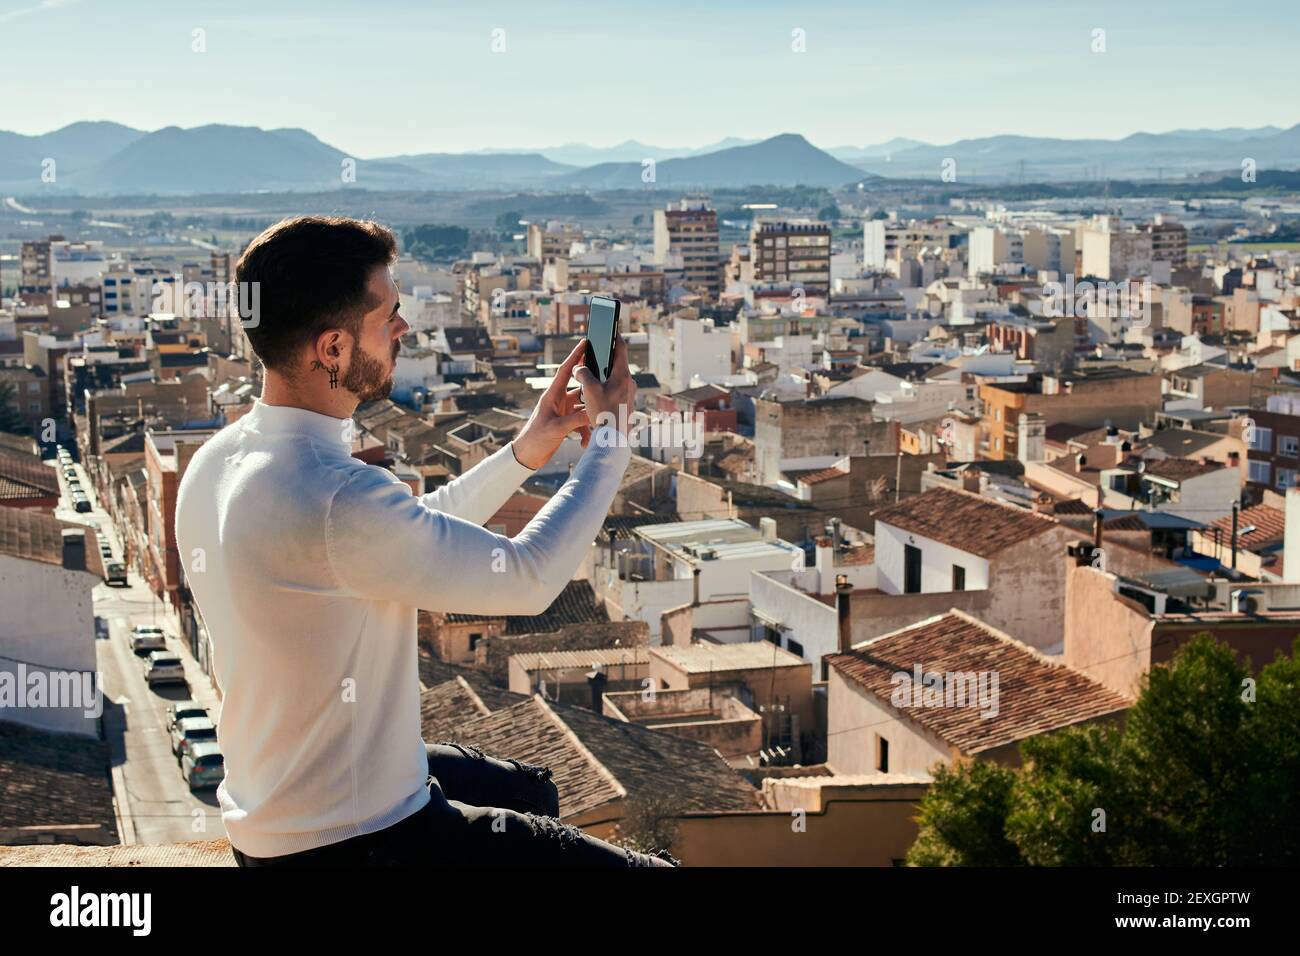 Man is sitting on a rooftop taking pictures with his phone Stock Photo